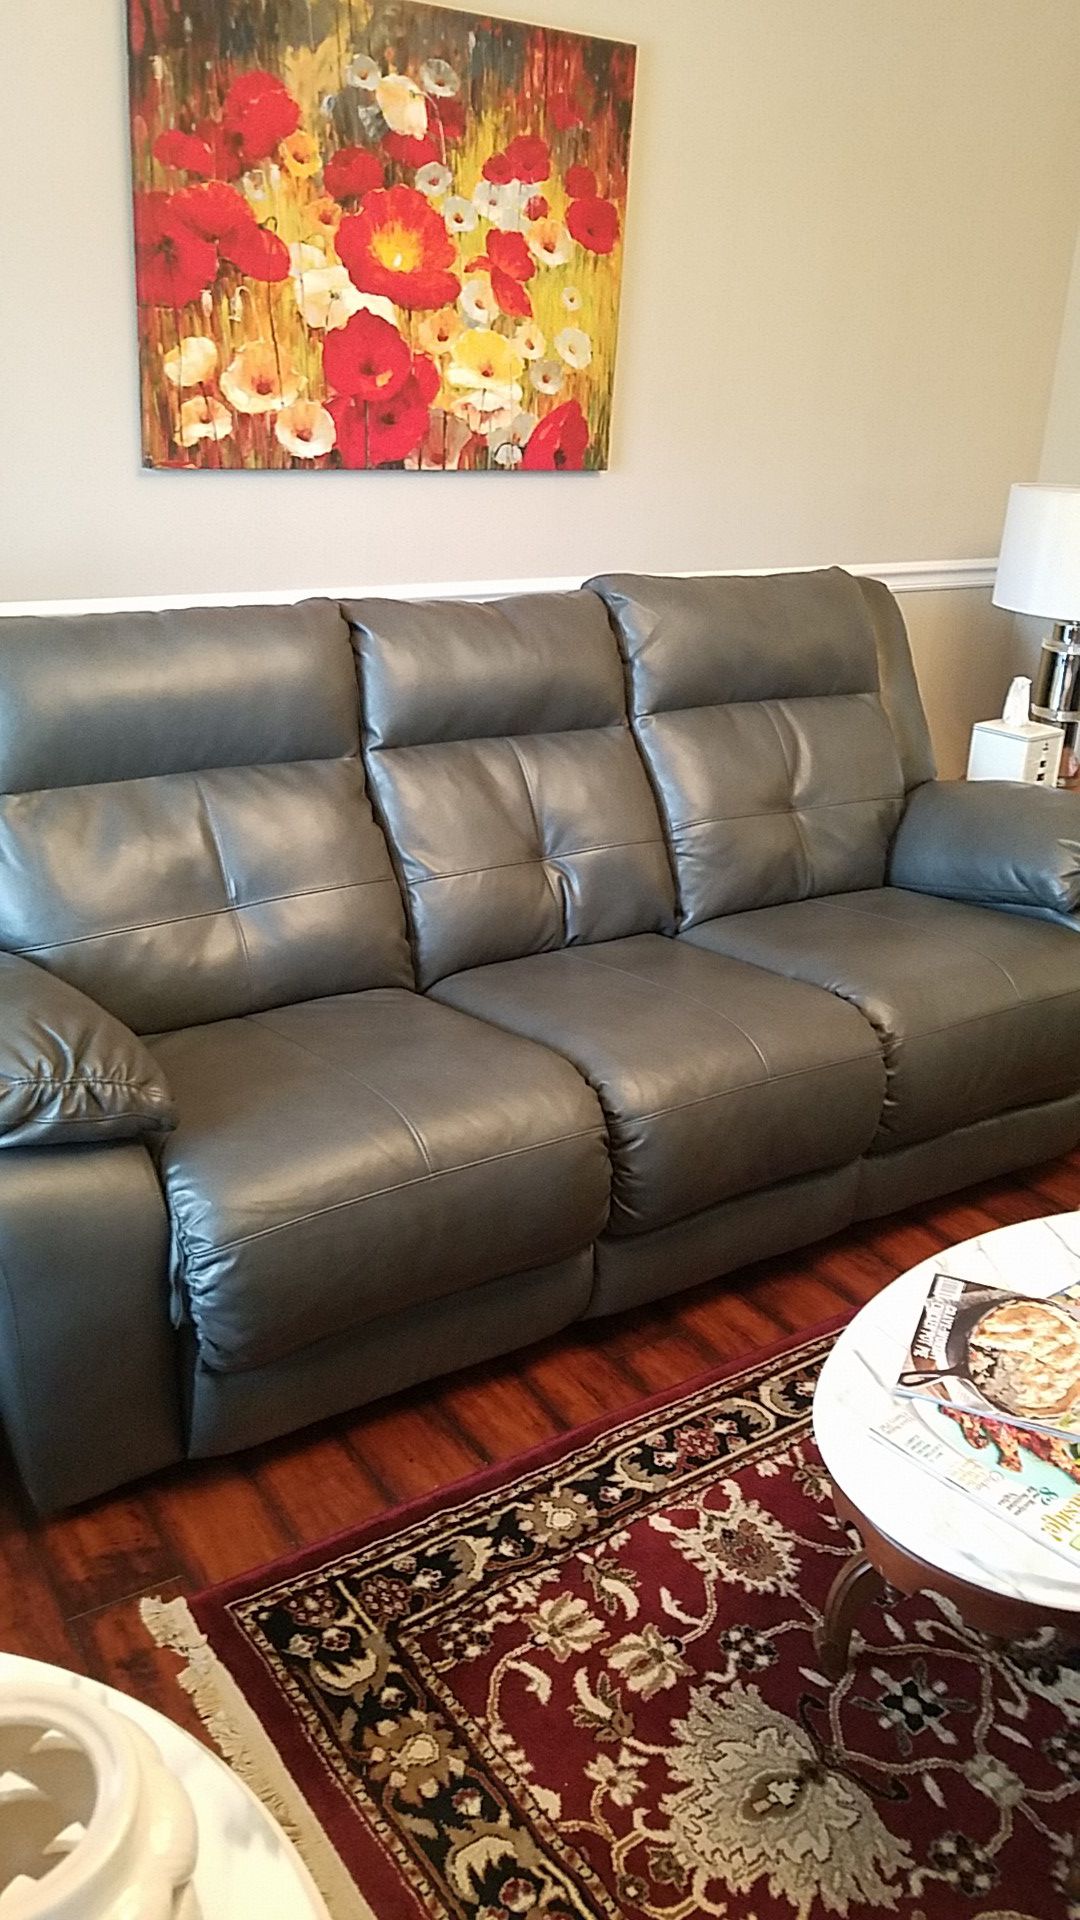 Sofa and loveseat 4 wall hugger recliners